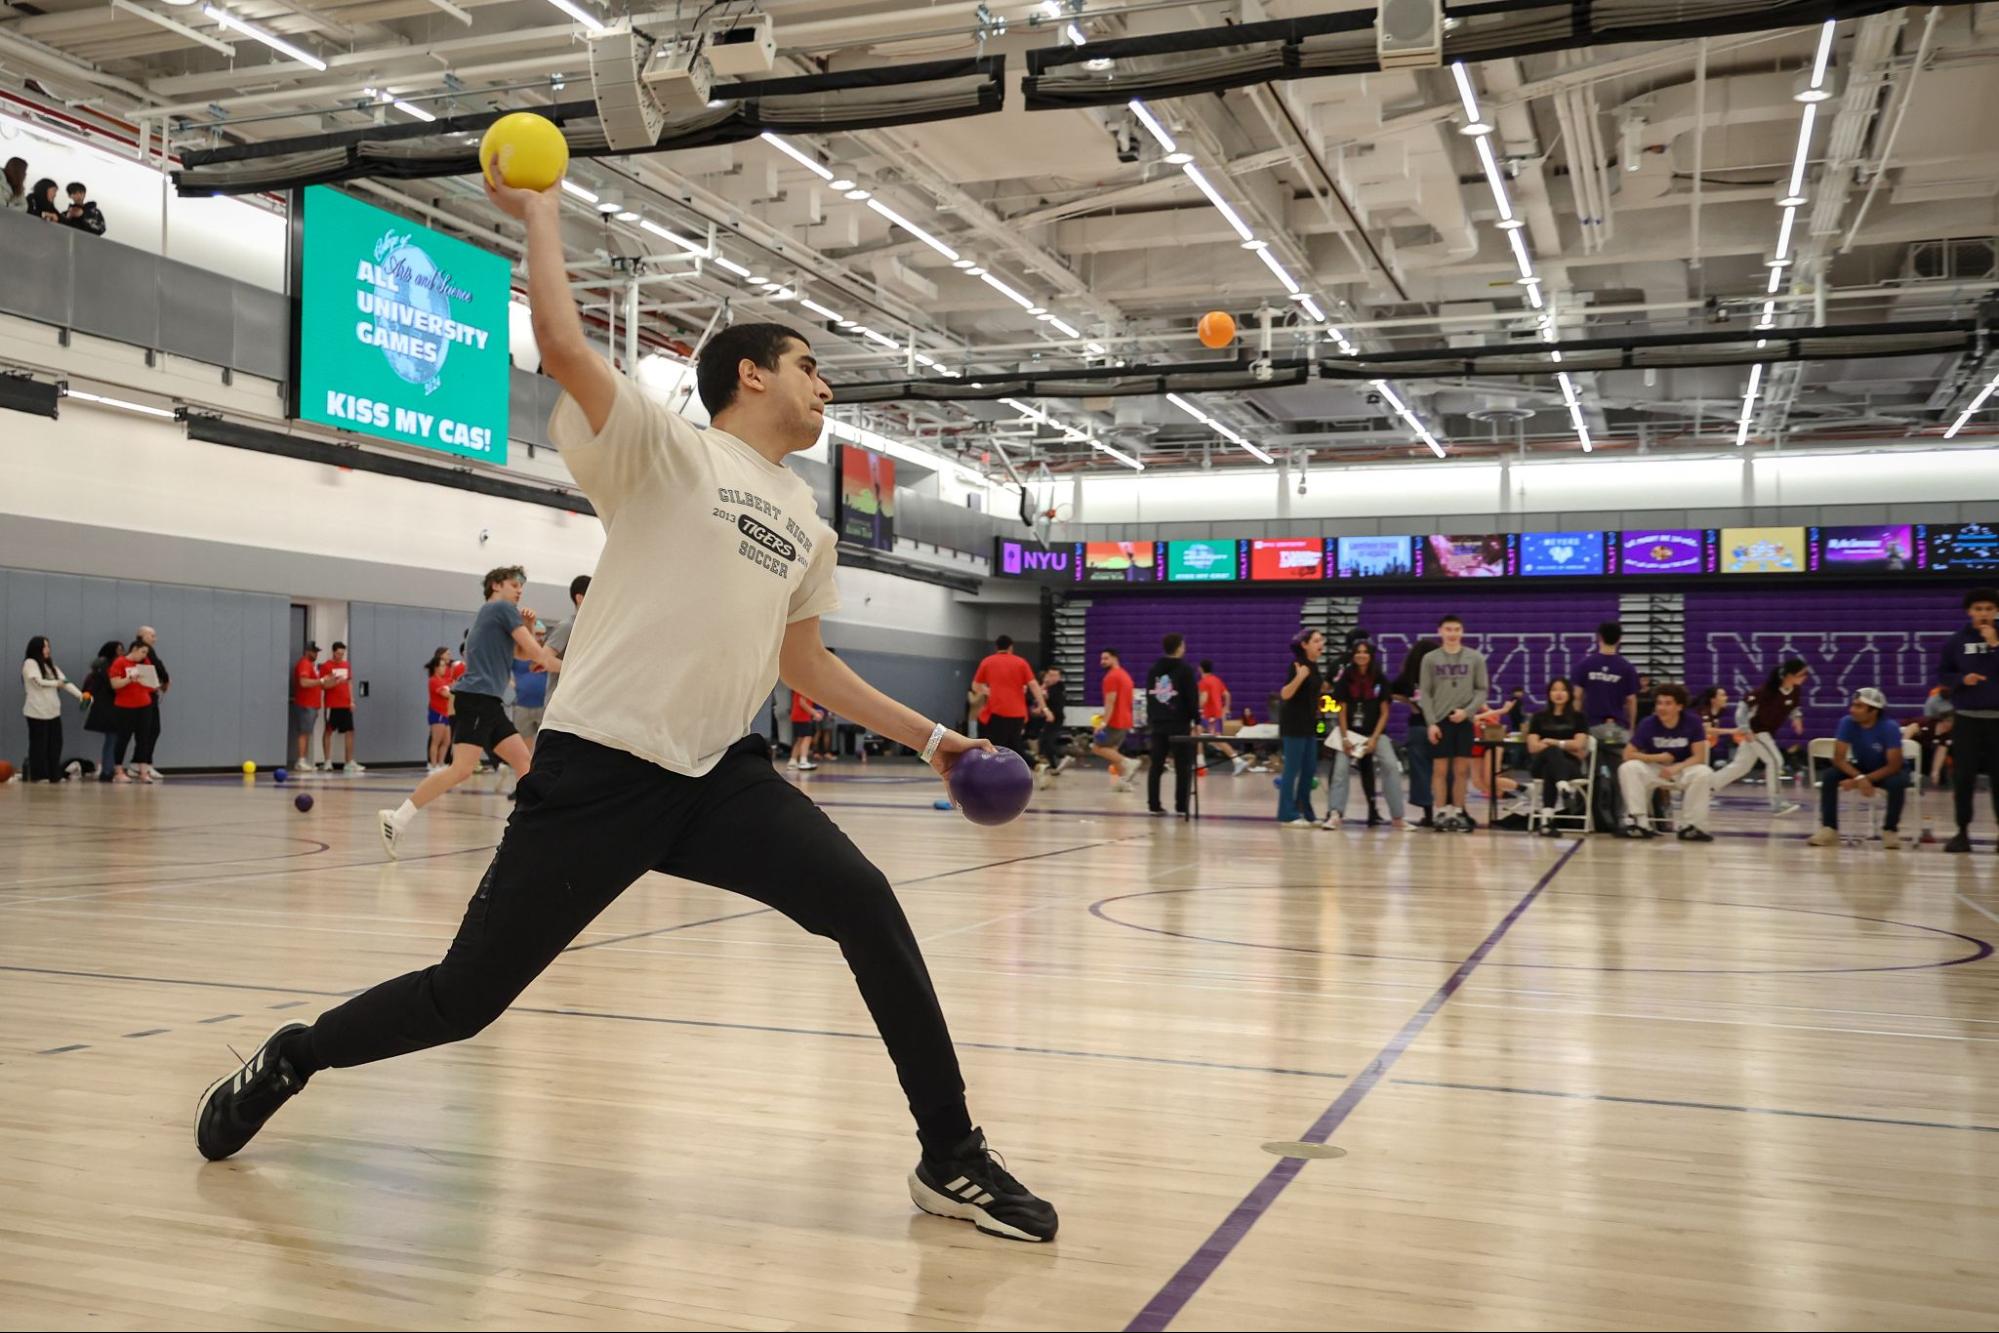 On a basketball court, a man winds up to throw a yellow ball while holding a purple ball in his other hand. In the background people spectate from the court's perimeter.